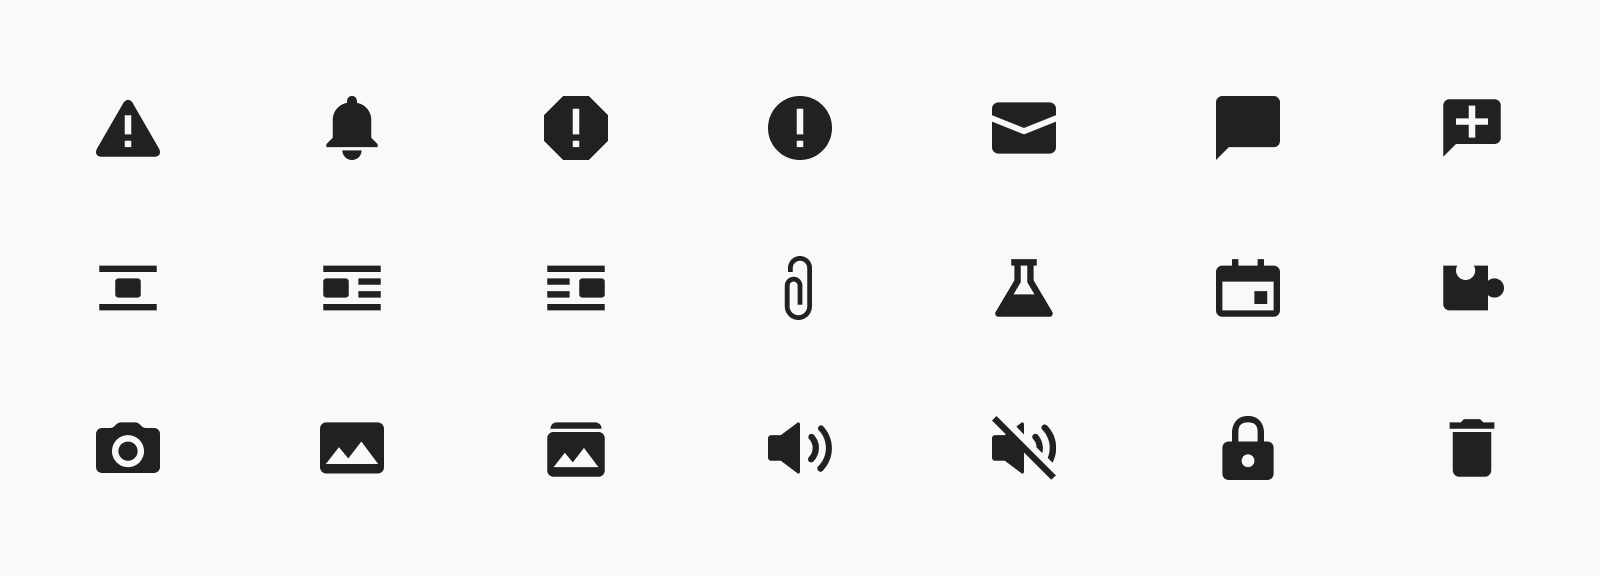 Wikimedia Design System icon collection excerpt